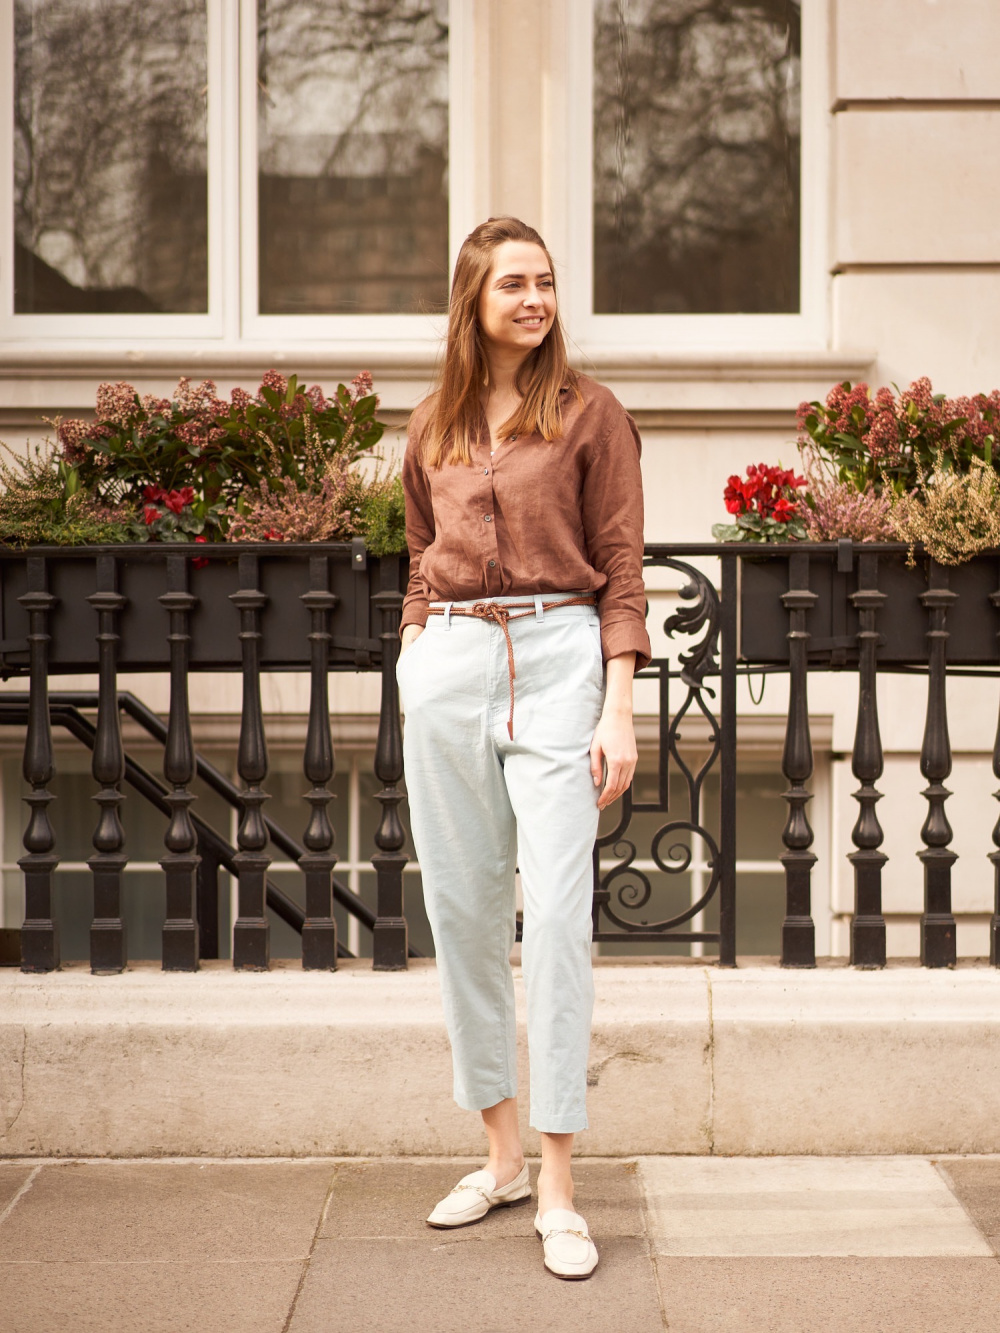 UNIQLO Linen: Cool & Neutral Styles for Summer